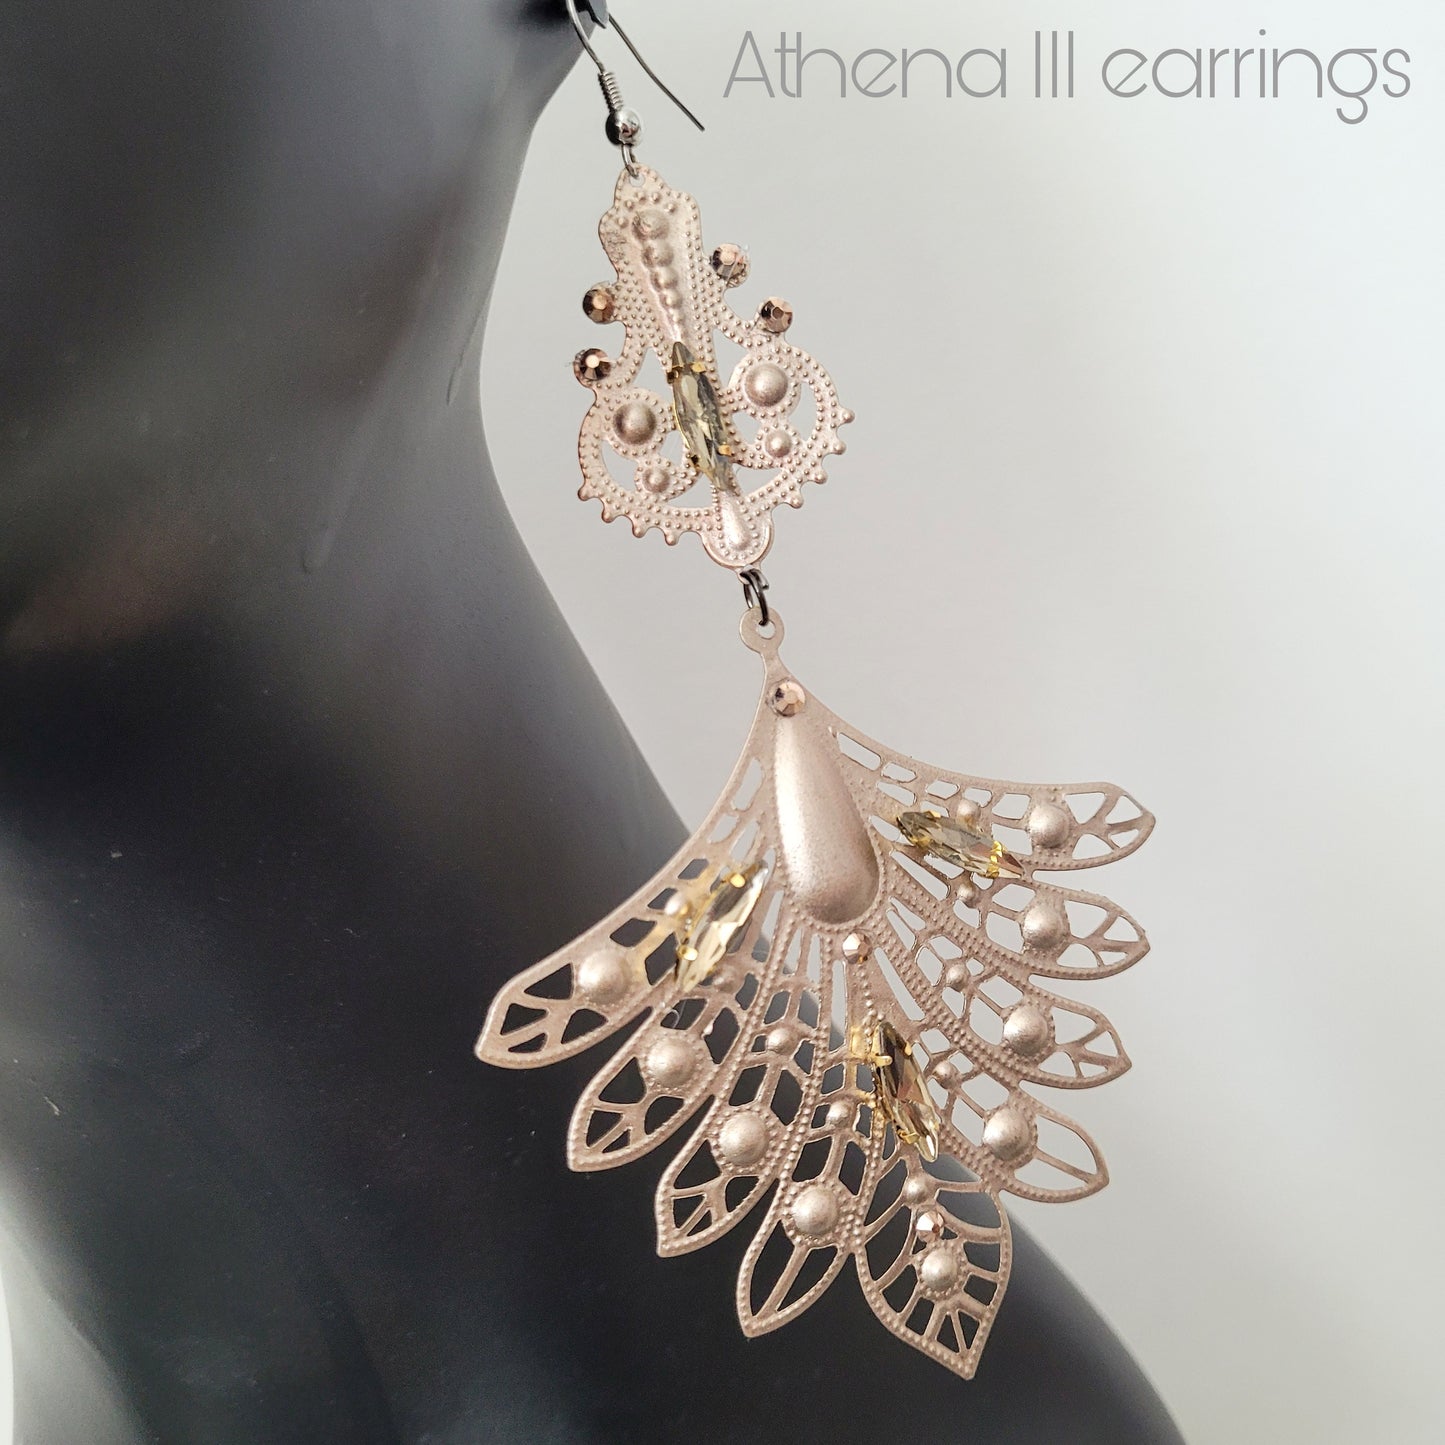 Deusa ex Machina collection: The Athena earrings (hook versions)